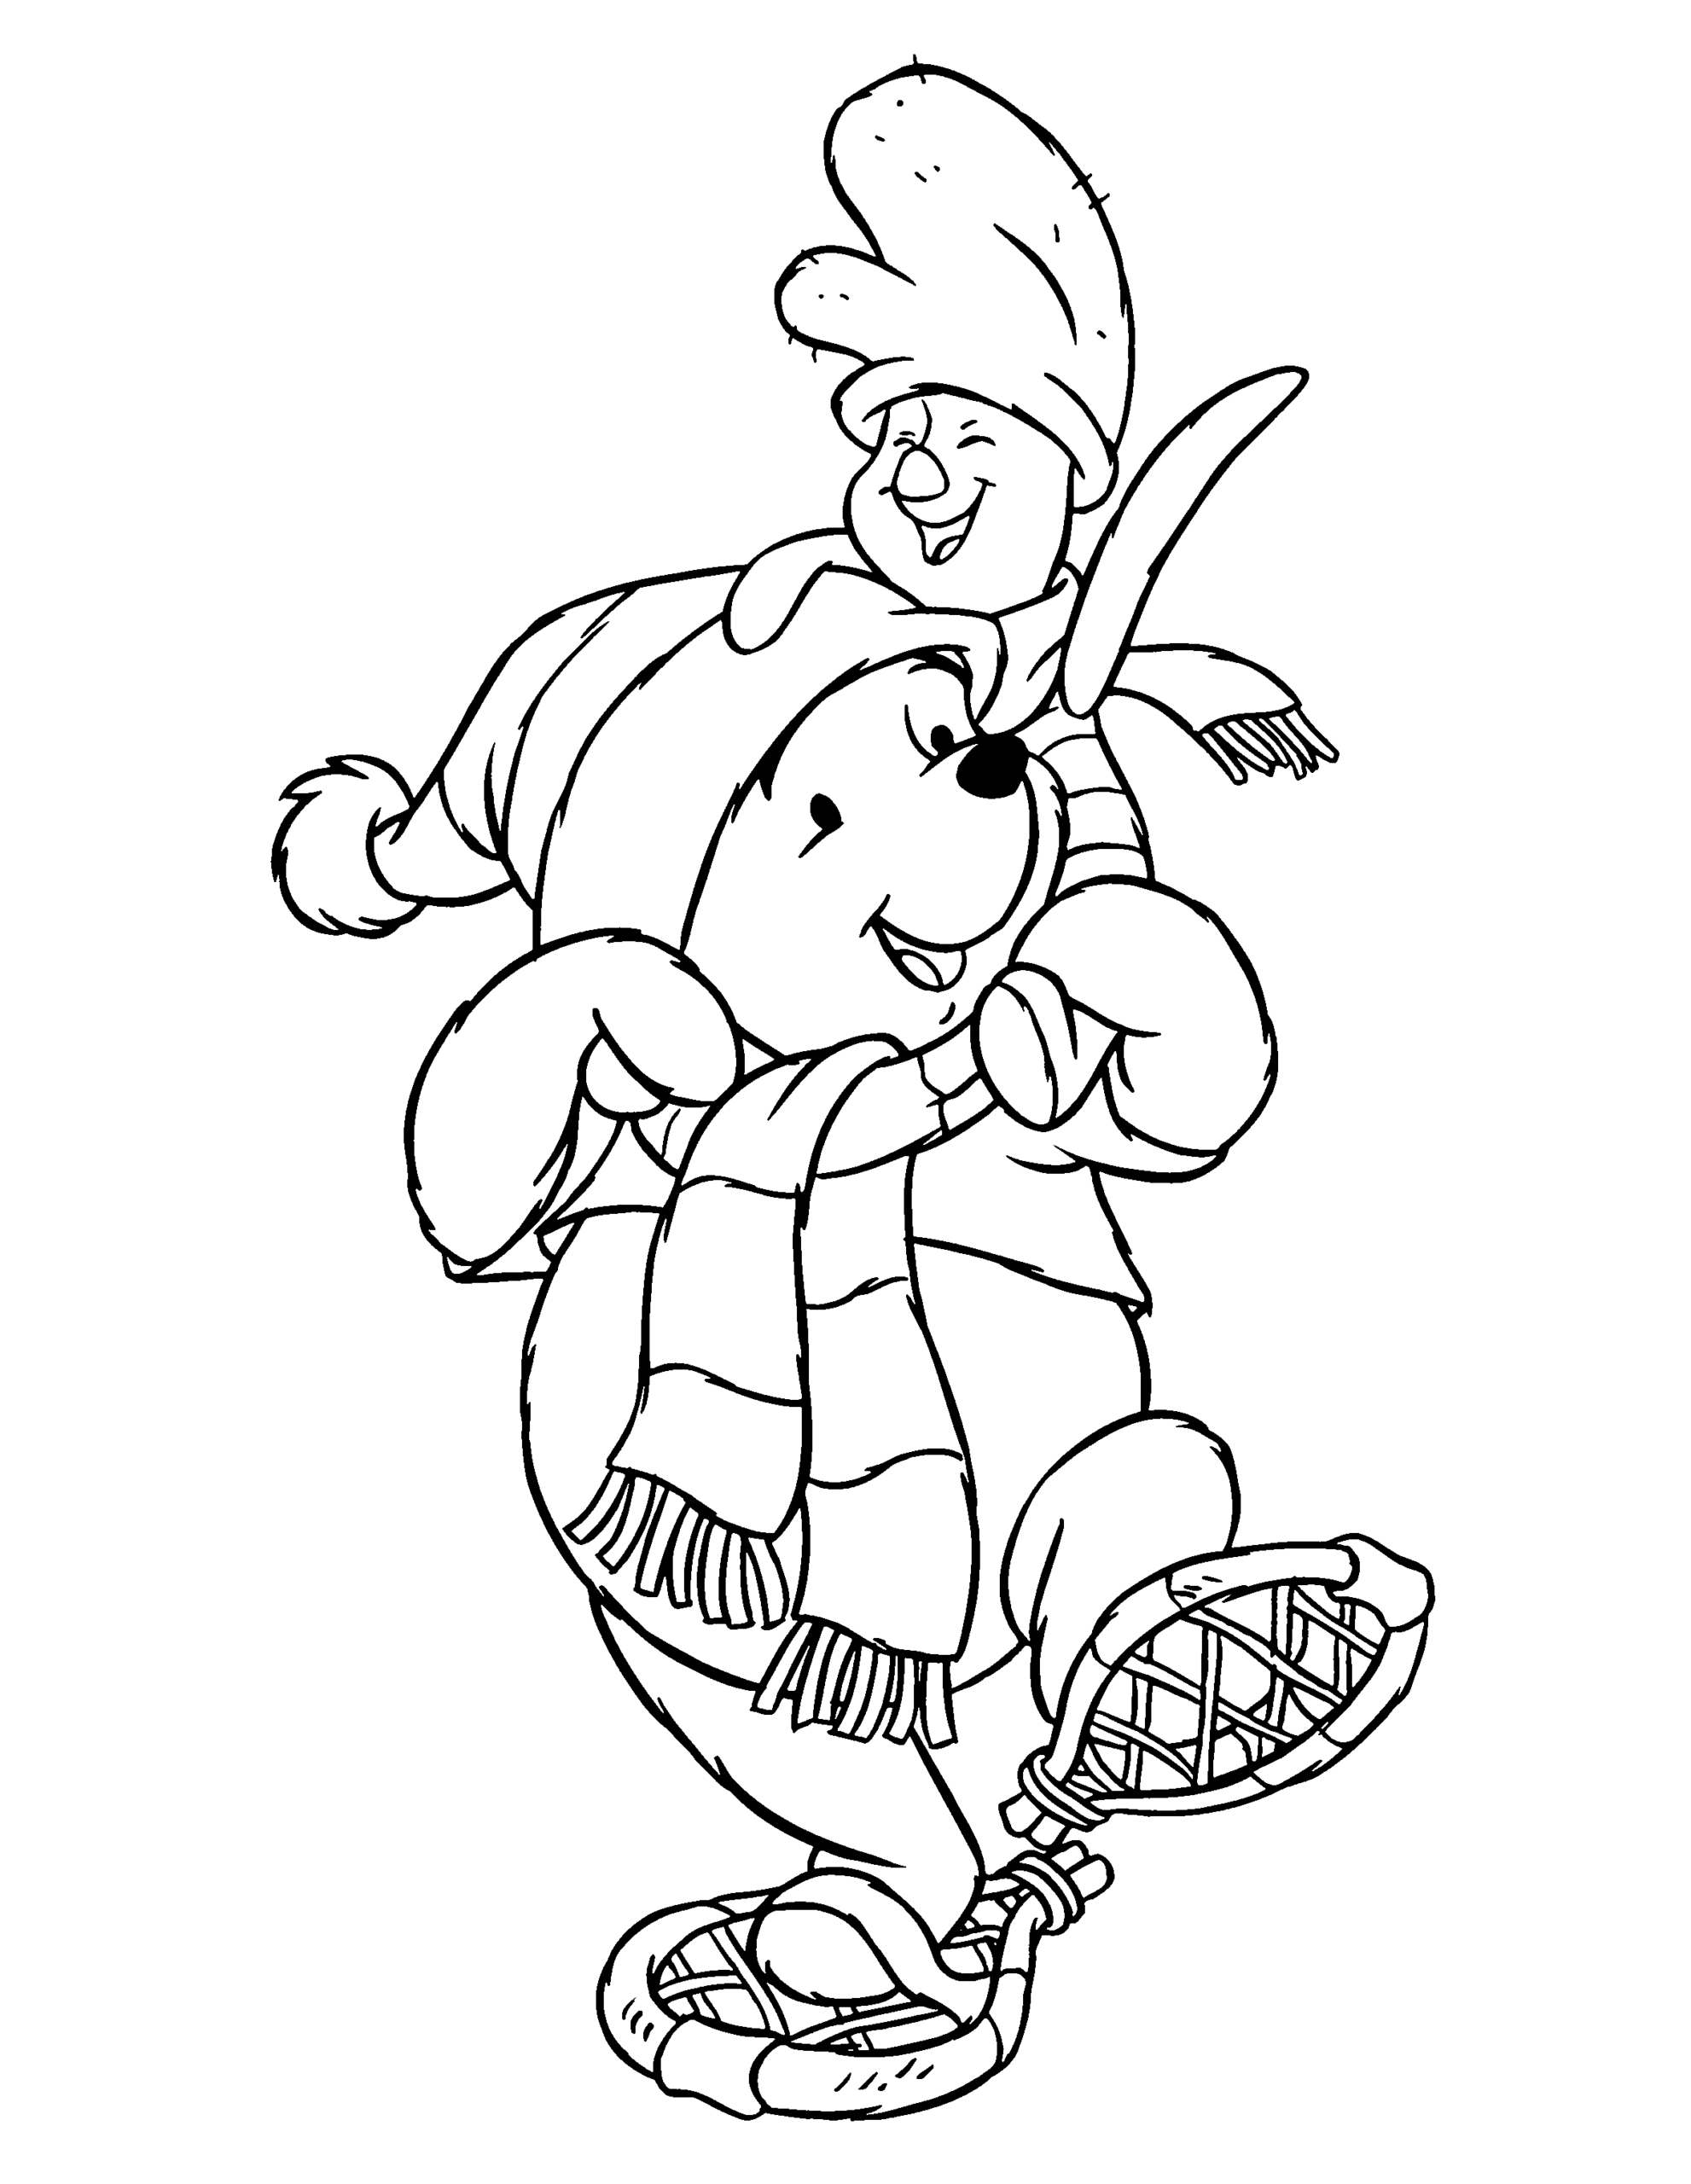 Winnie the Pooh Coloring Pages Cartoons winnie the pooh 33 Printable 2020 7137 Coloring4free